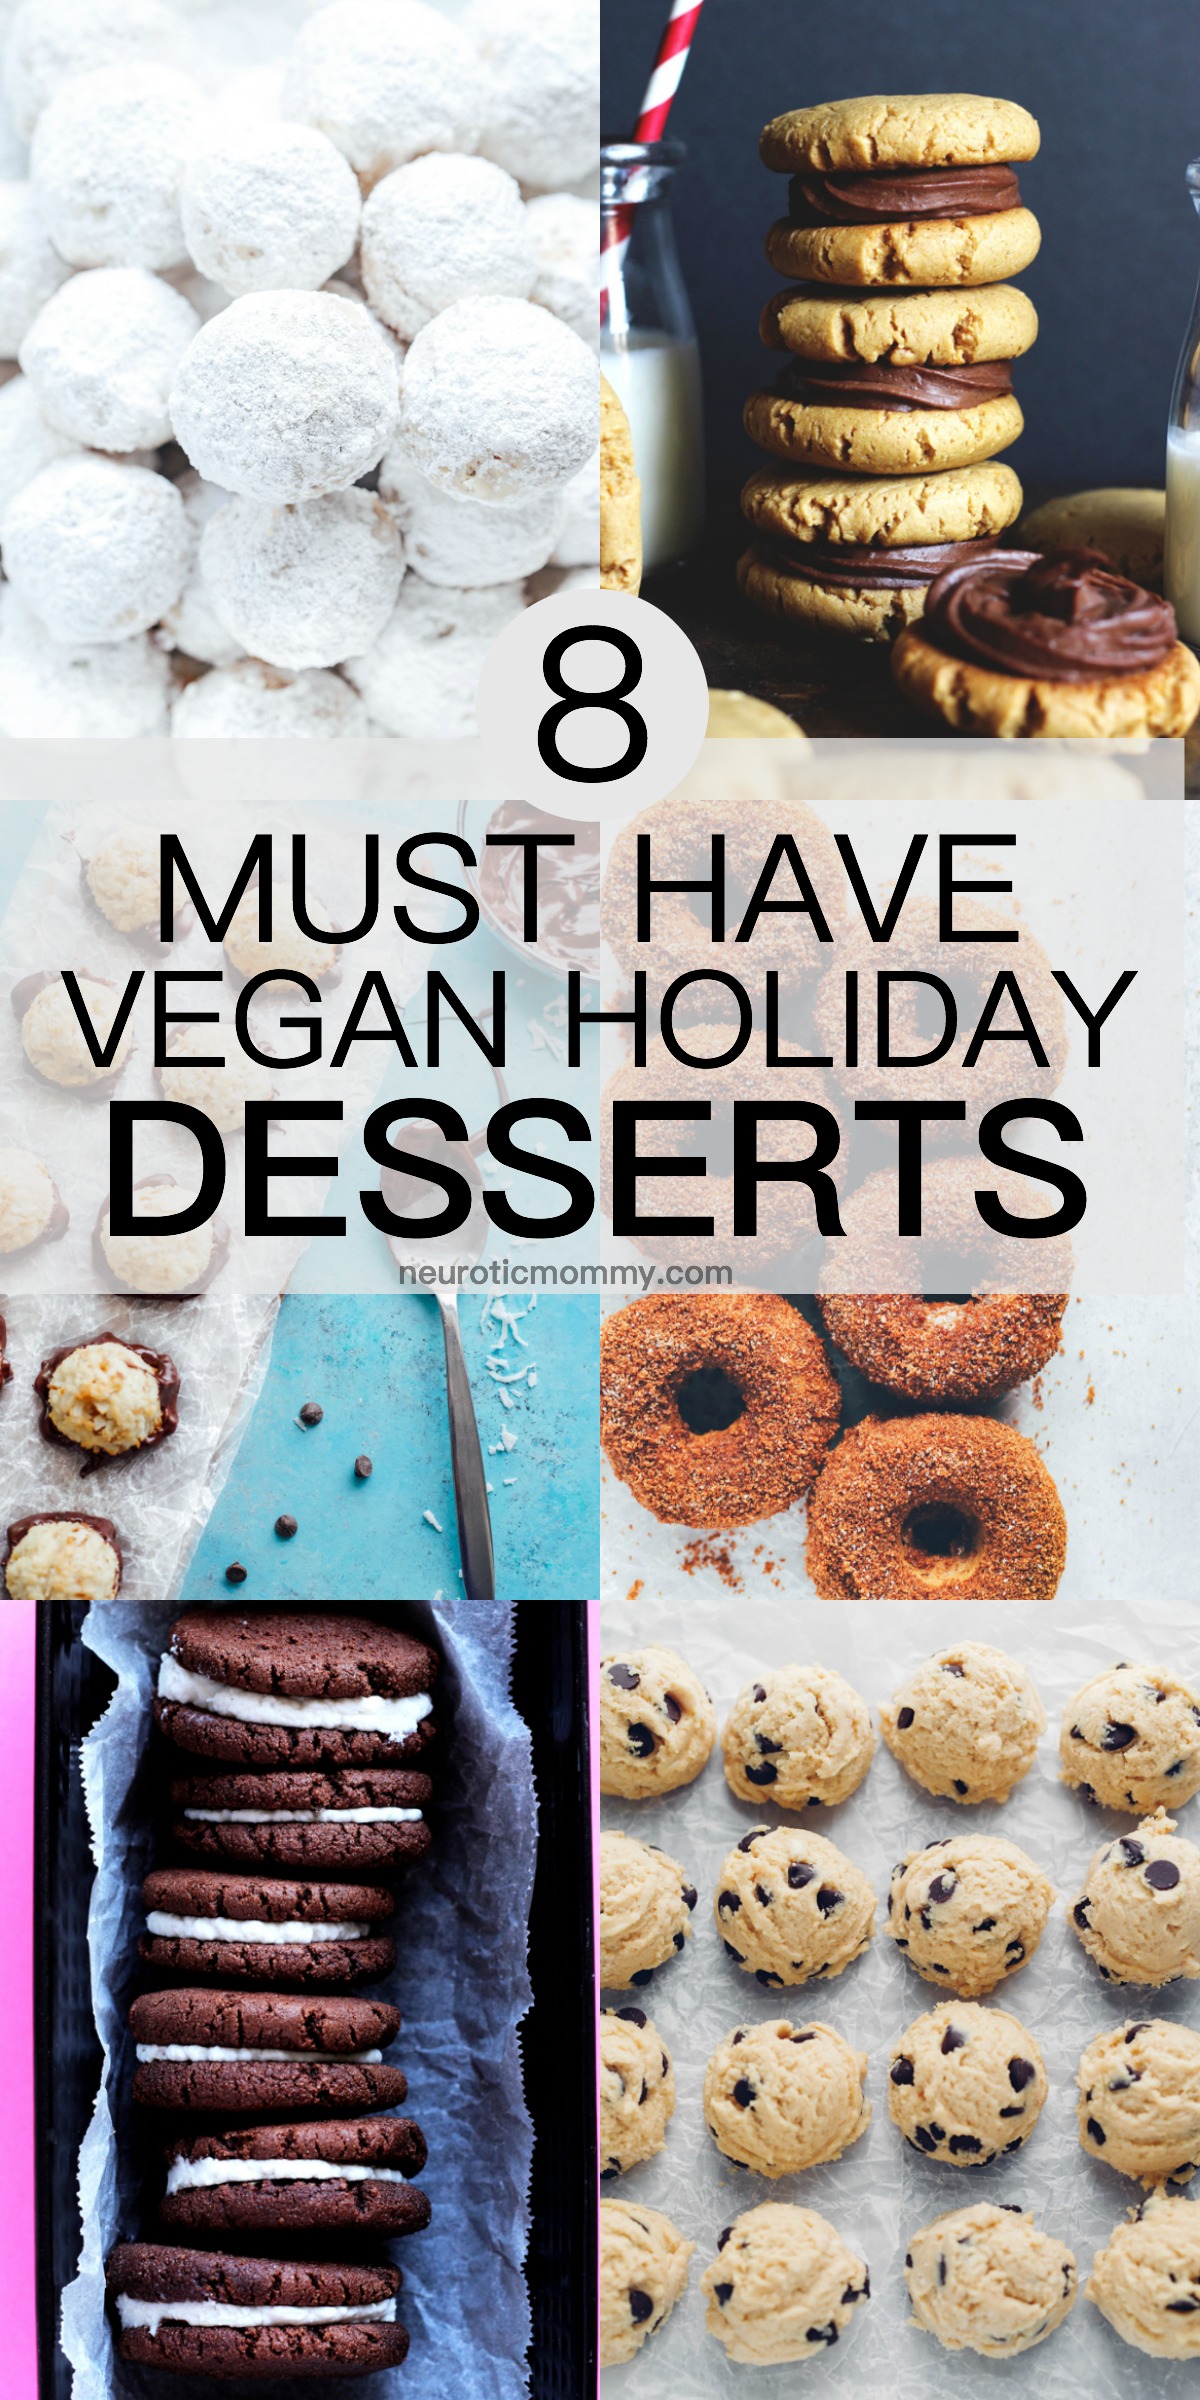 8 Must Have Vegan Holiday Desserts - Make any one of these treats and you'll be all set in the snacks and desserts department for the holidays. Crowd pleasers and head turners for sure. NeuroticMommy.com #vegan #vegandesserts #holidays